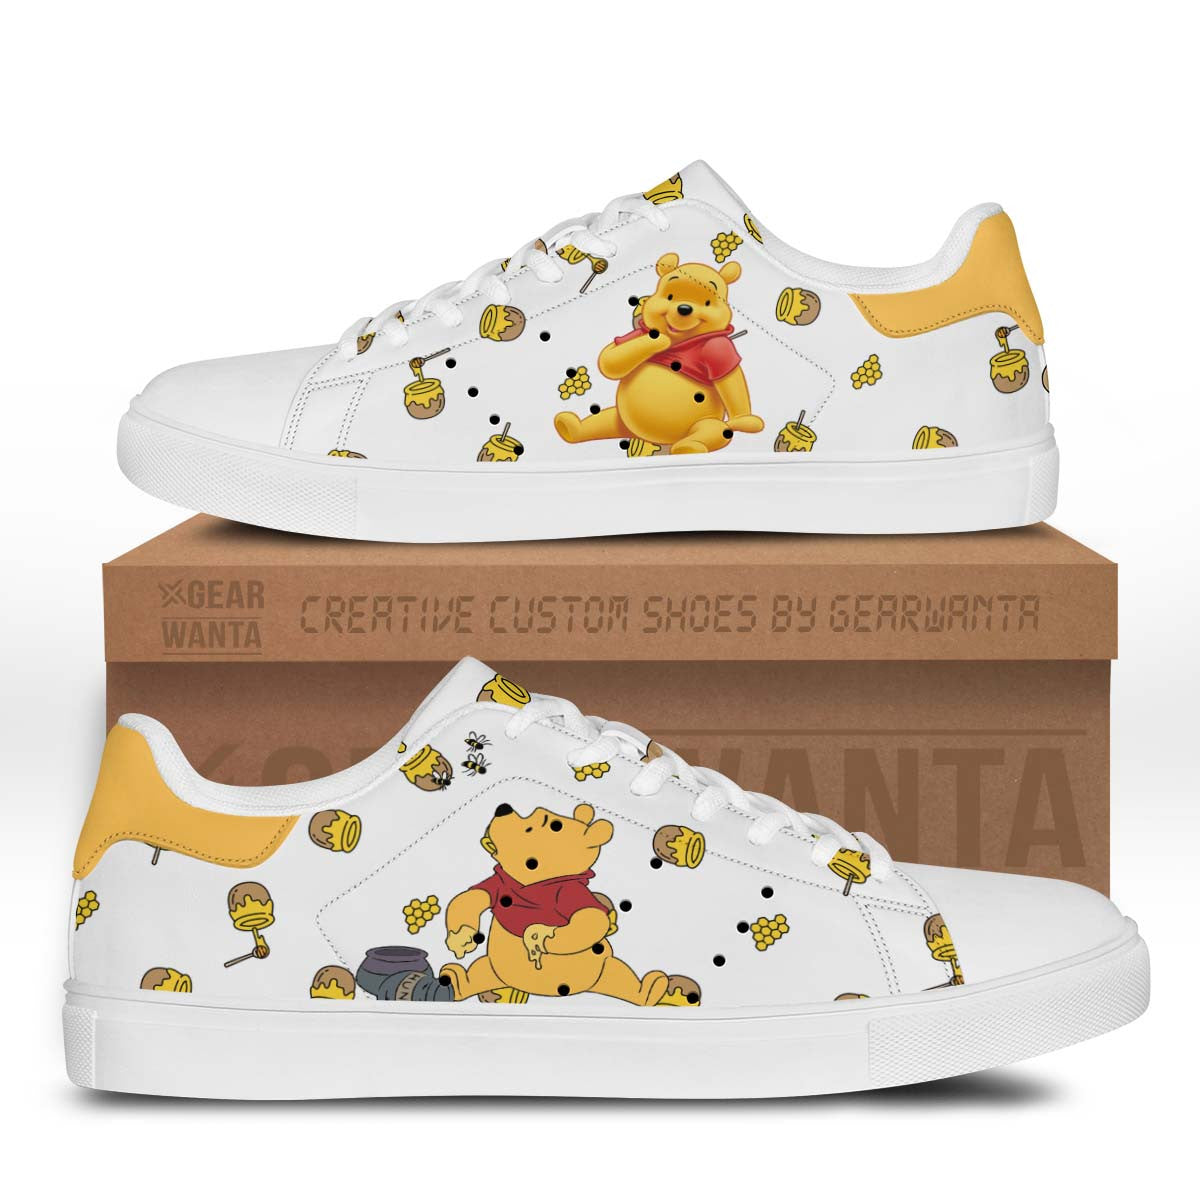 Pooh Stan Shoes Custom Winnie The Pooh Sneakers For Fans-Gear Wanta